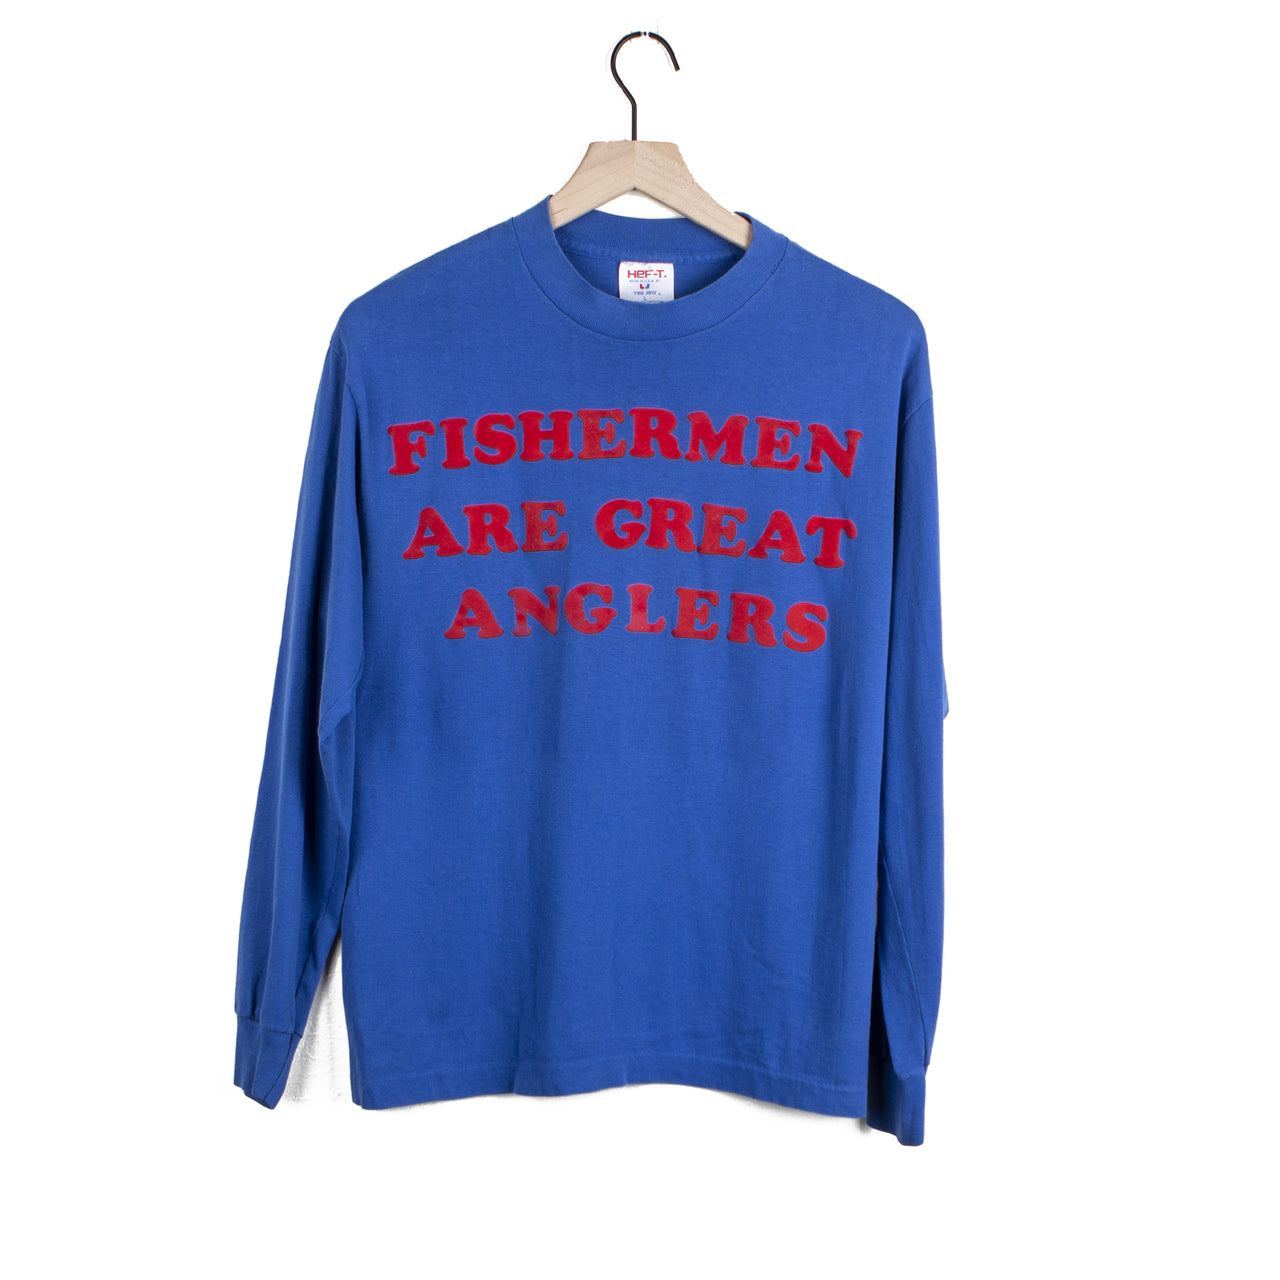 No. 89277 (Fisherman Are Great Anglers Long Sleeve)